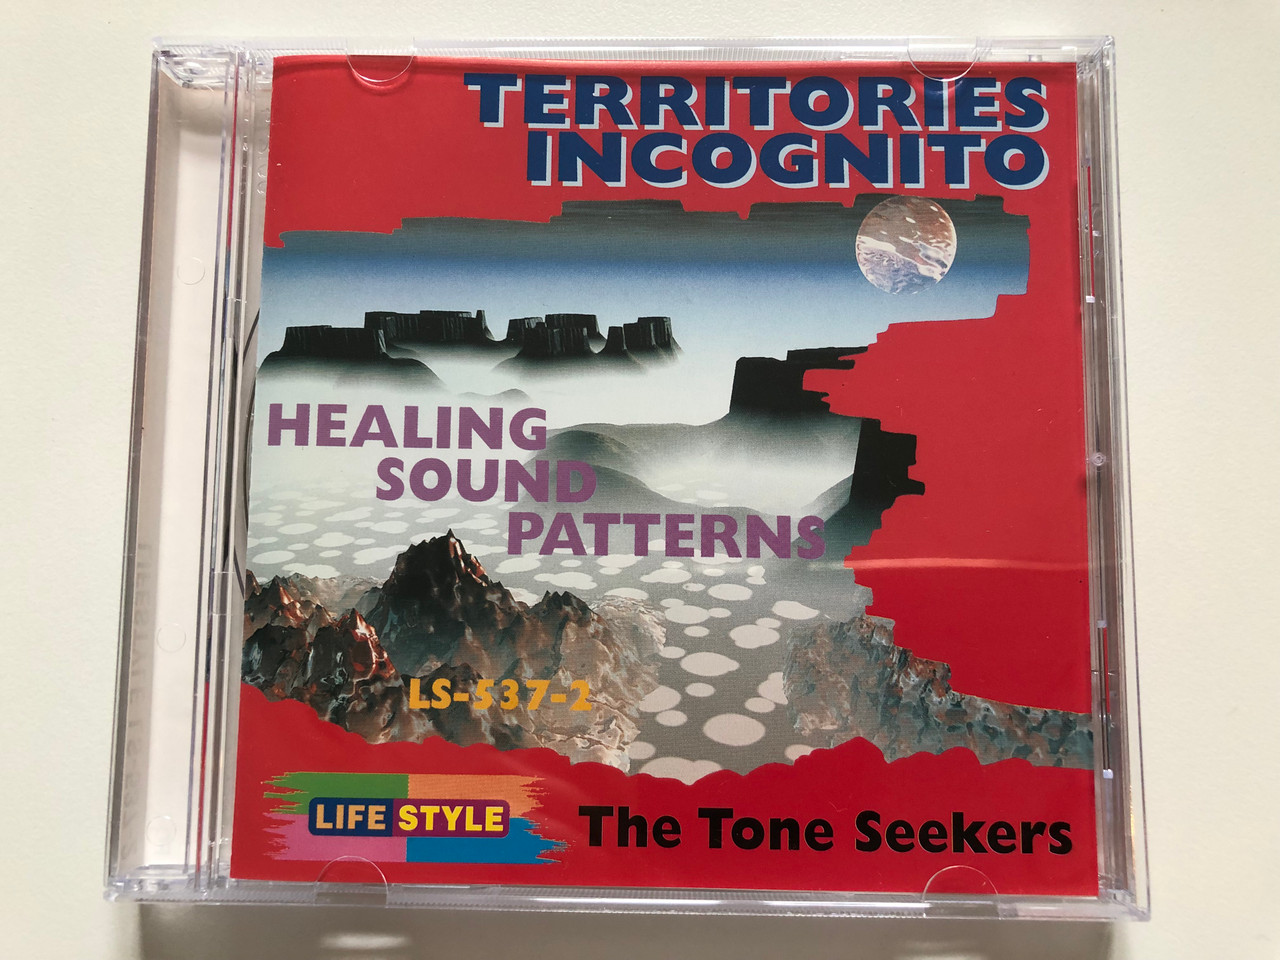 https://cdn10.bigcommerce.com/s-62bdpkt7pb/products/30869/images/182118/Territories_Incognito_Healing_Sound_Patterns_-_The_Tone_Seekers_Lifestyle_Audio_CD_LS-537-2_1__13759.1624295839.1280.1280.JPG?c=2